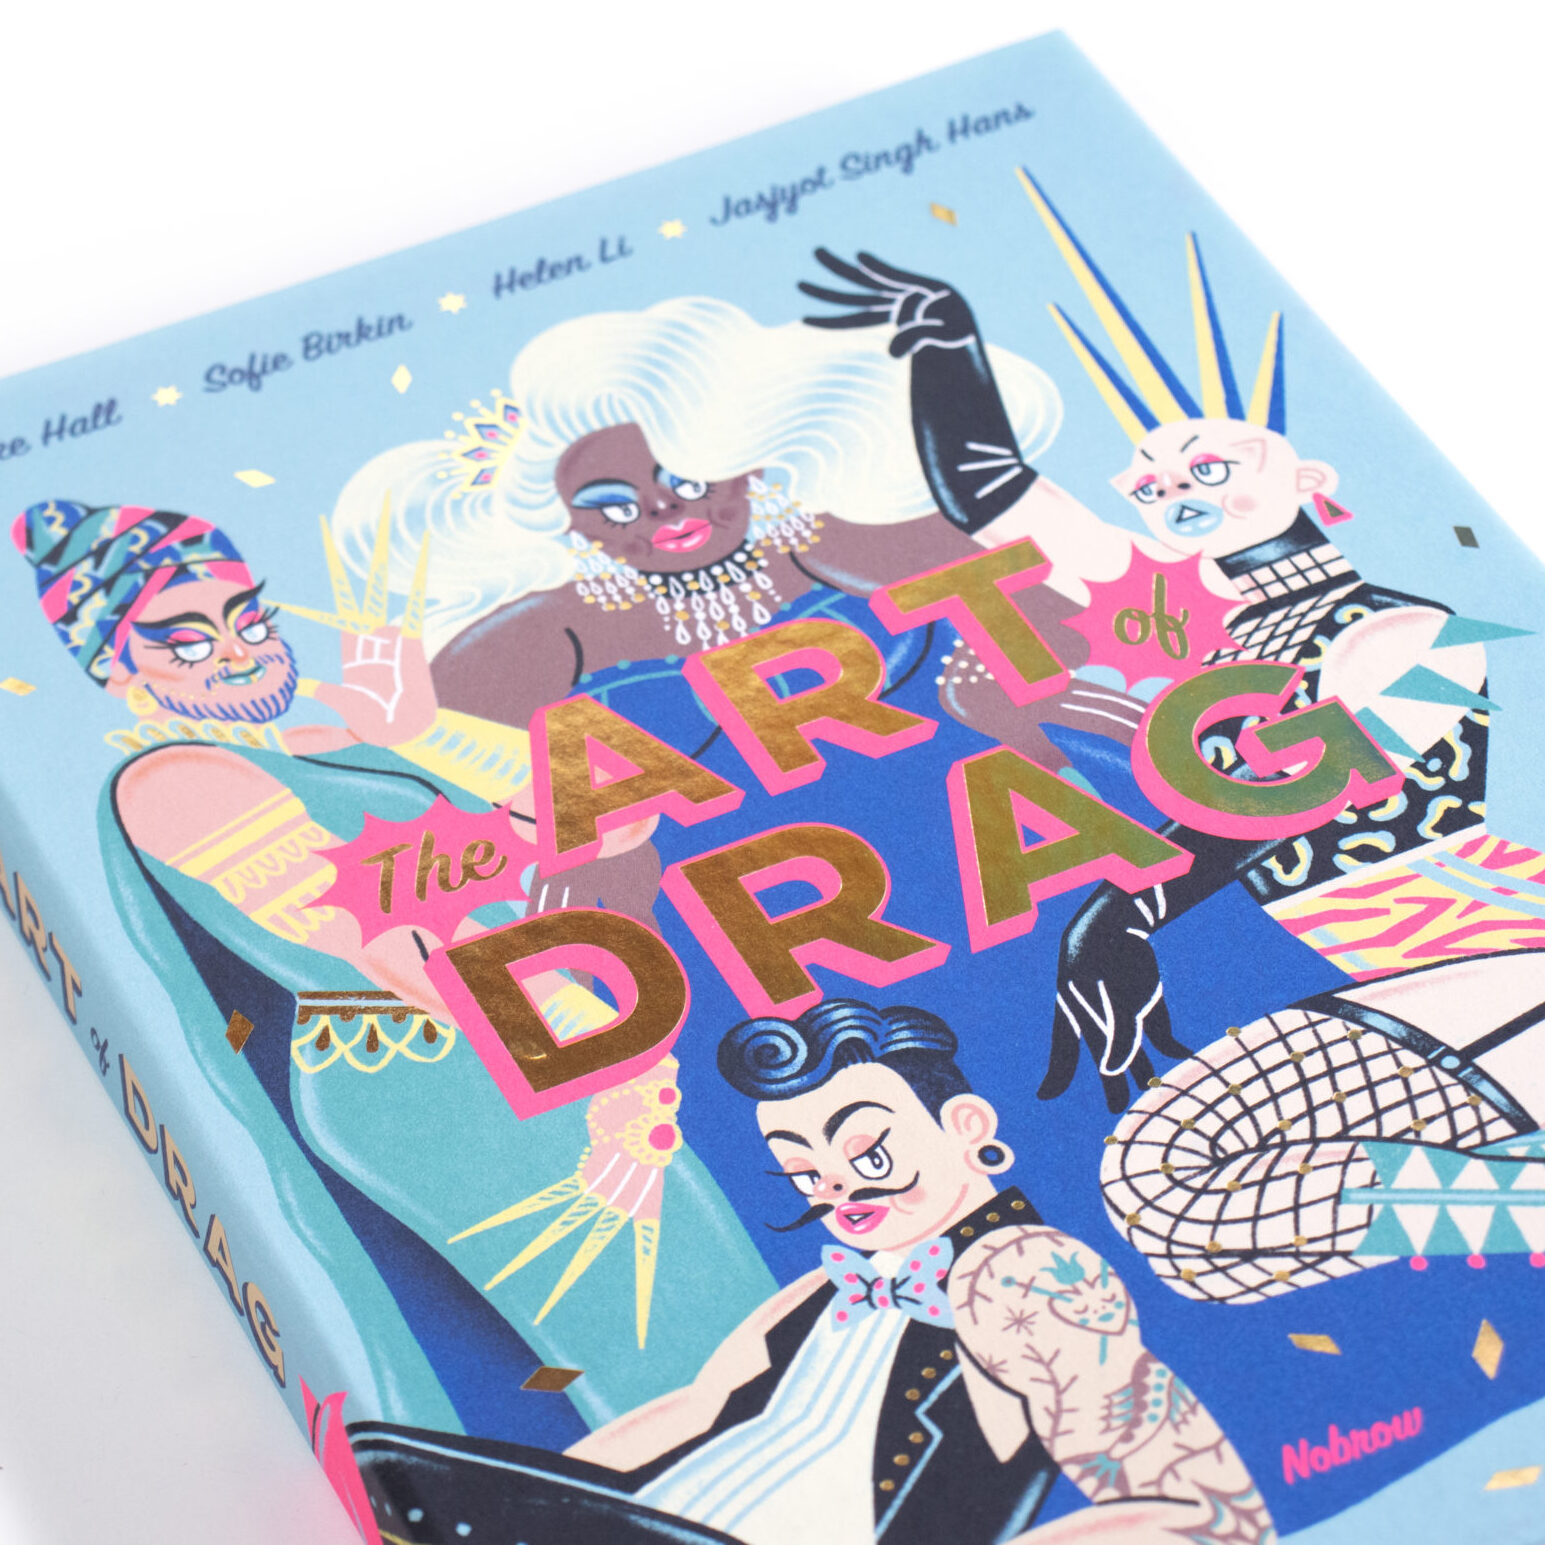 A picture of the illustrated book Art of Drag